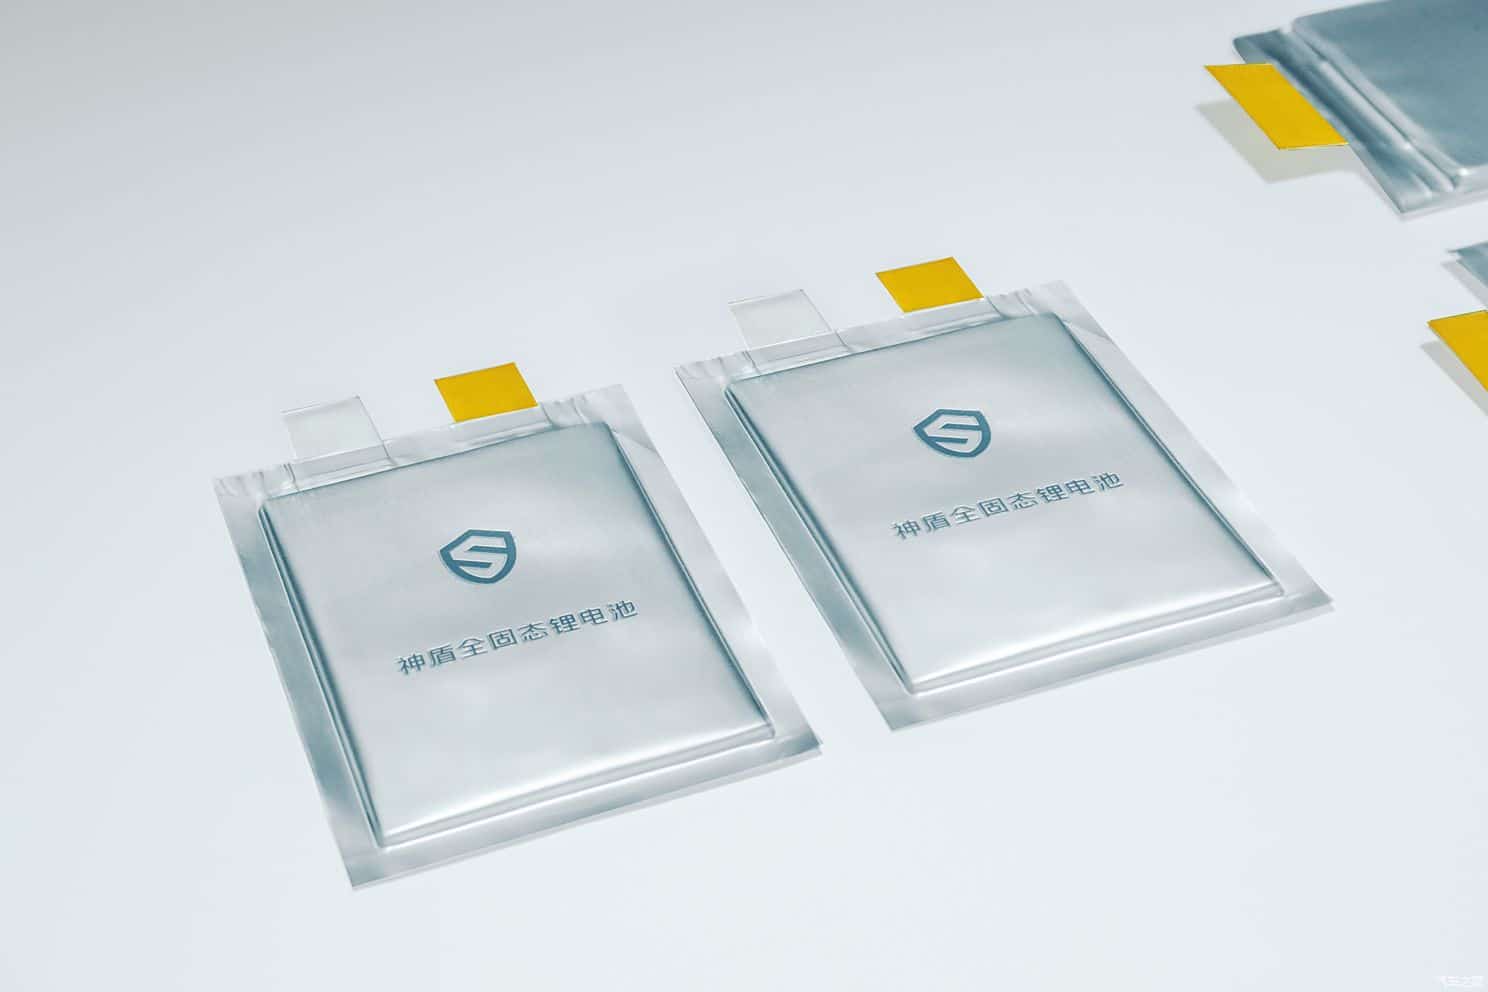 Geely debuts new generation nearly 200Wh/kg Aegis lithium iron phosphate battery